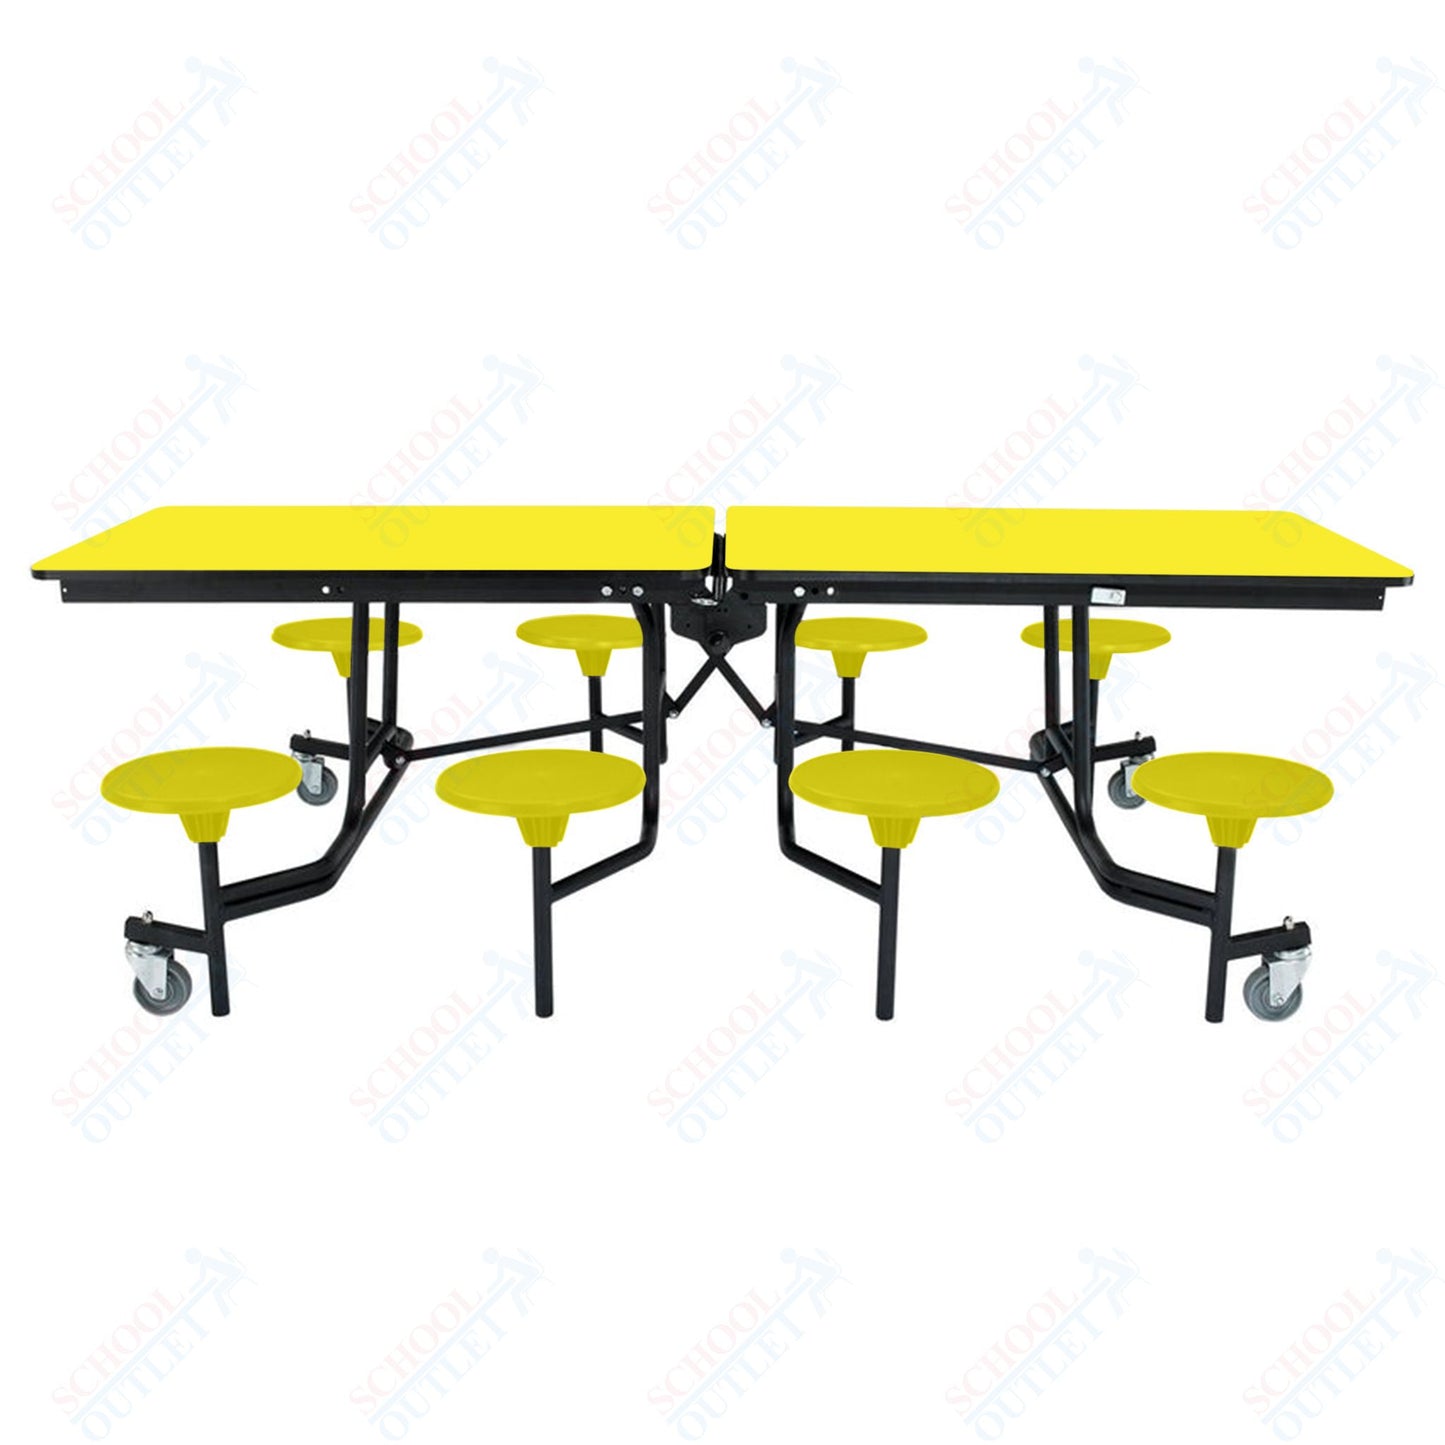 NPS Mobile Cafeteria Table - 30" W x 8' L - 8 Stools - MDF Core - Protect Edge - Black Powdercoated Frame